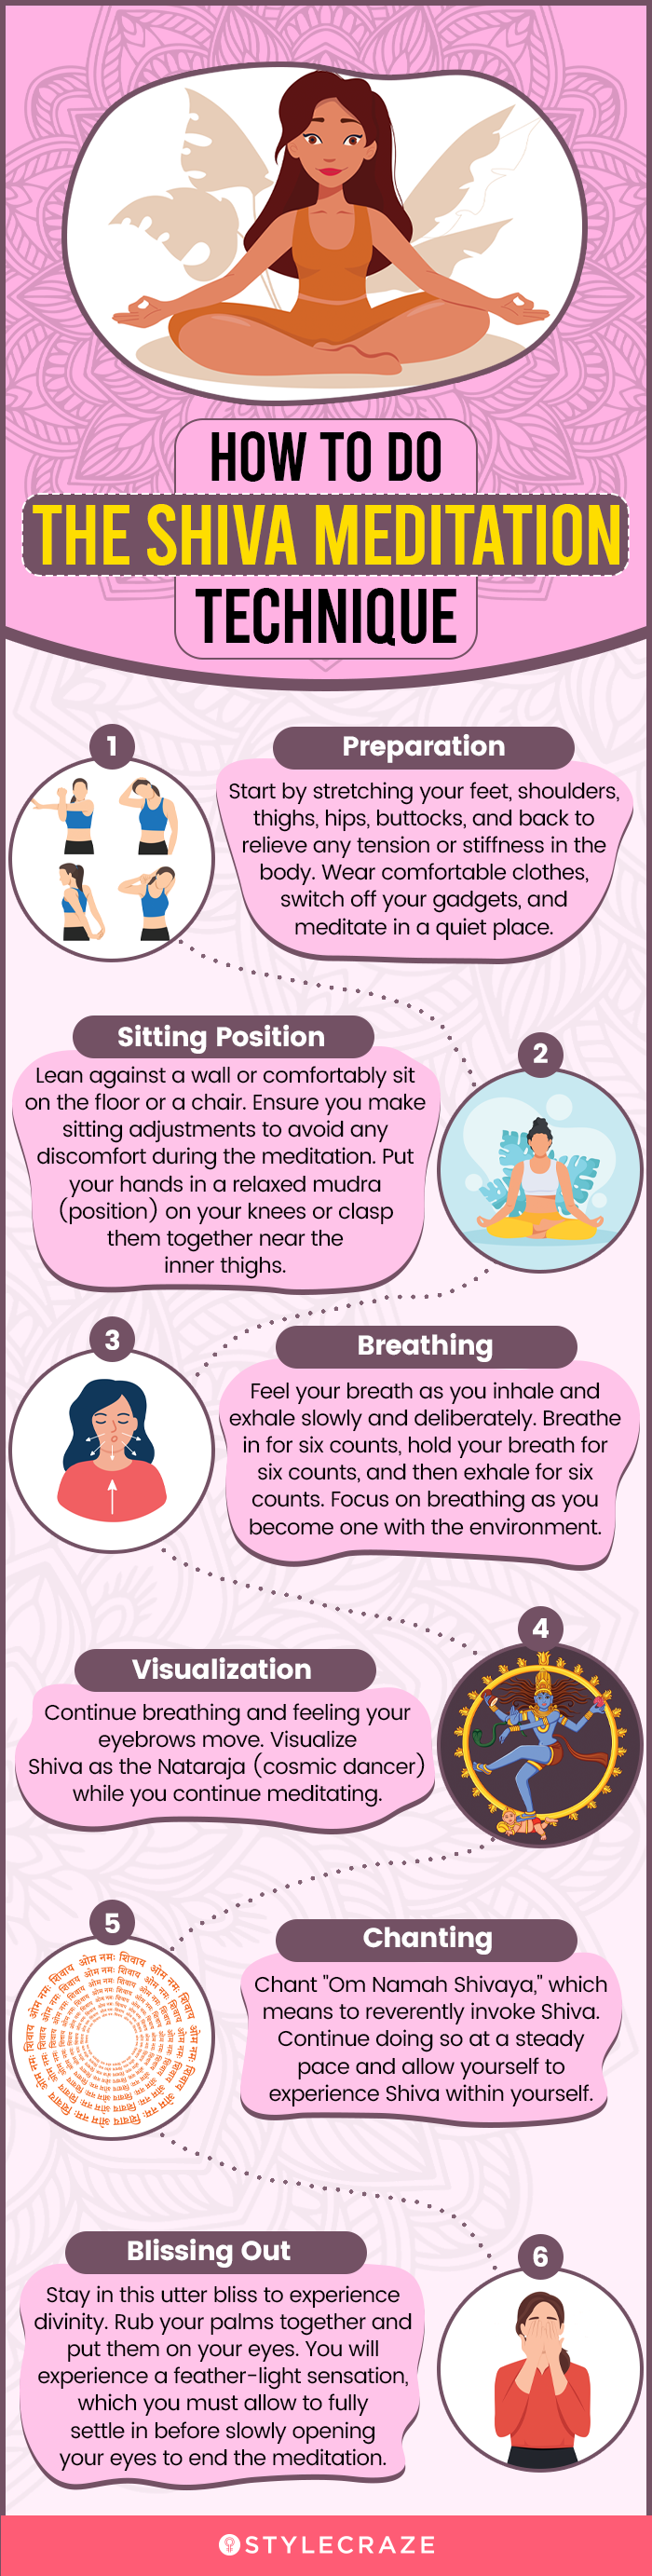 how to do the shiva meditation technique (infographic)